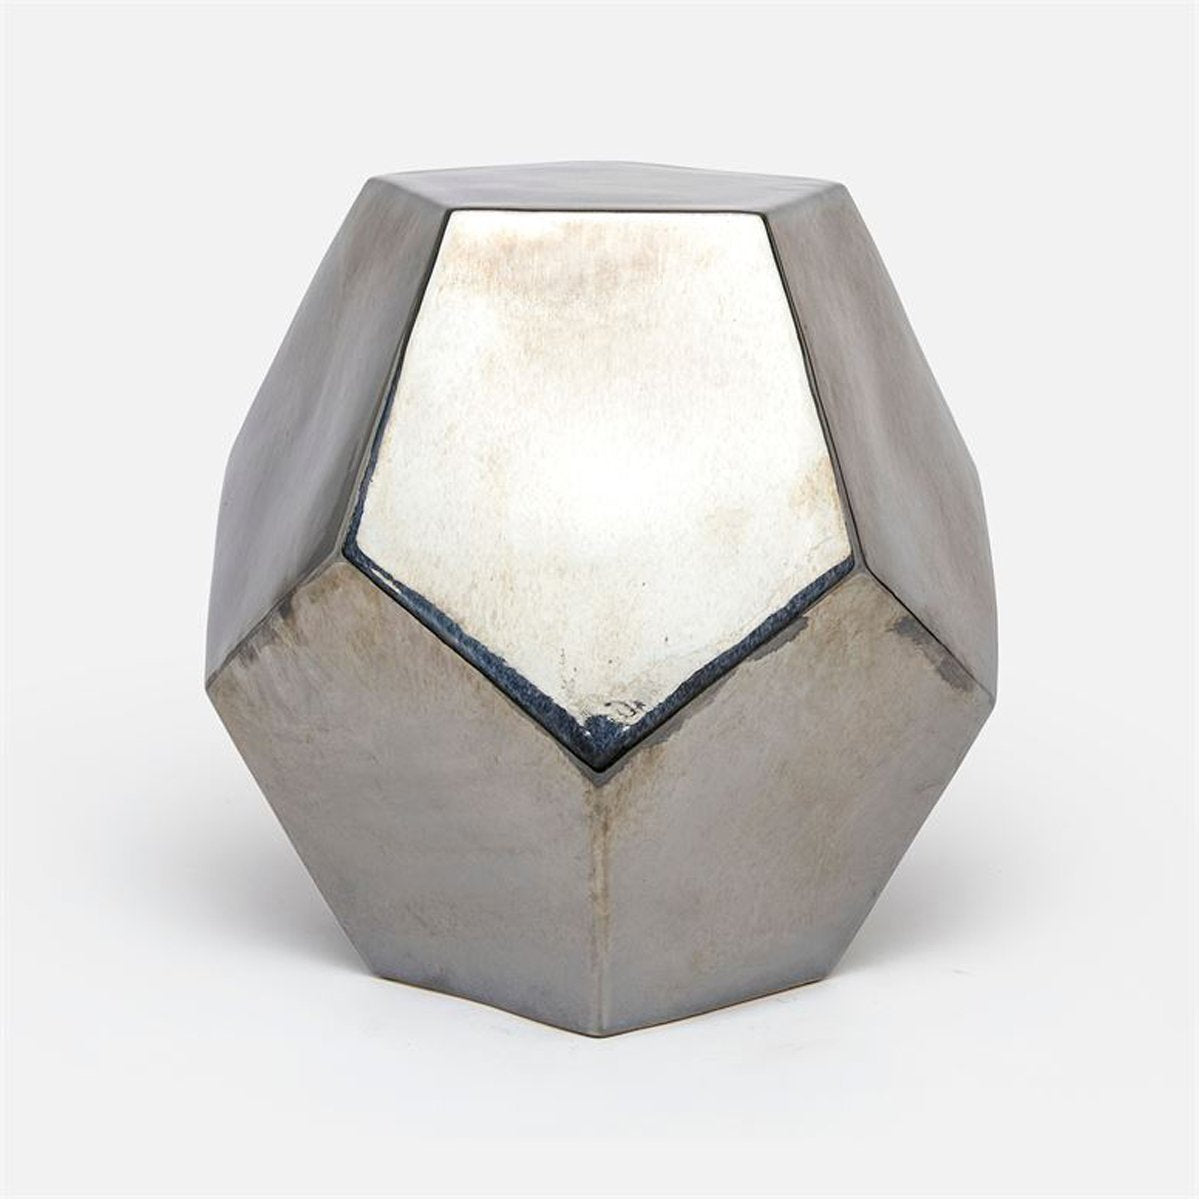 Made Goods Cole Ceramic Dodecahedron Outdoor Stool